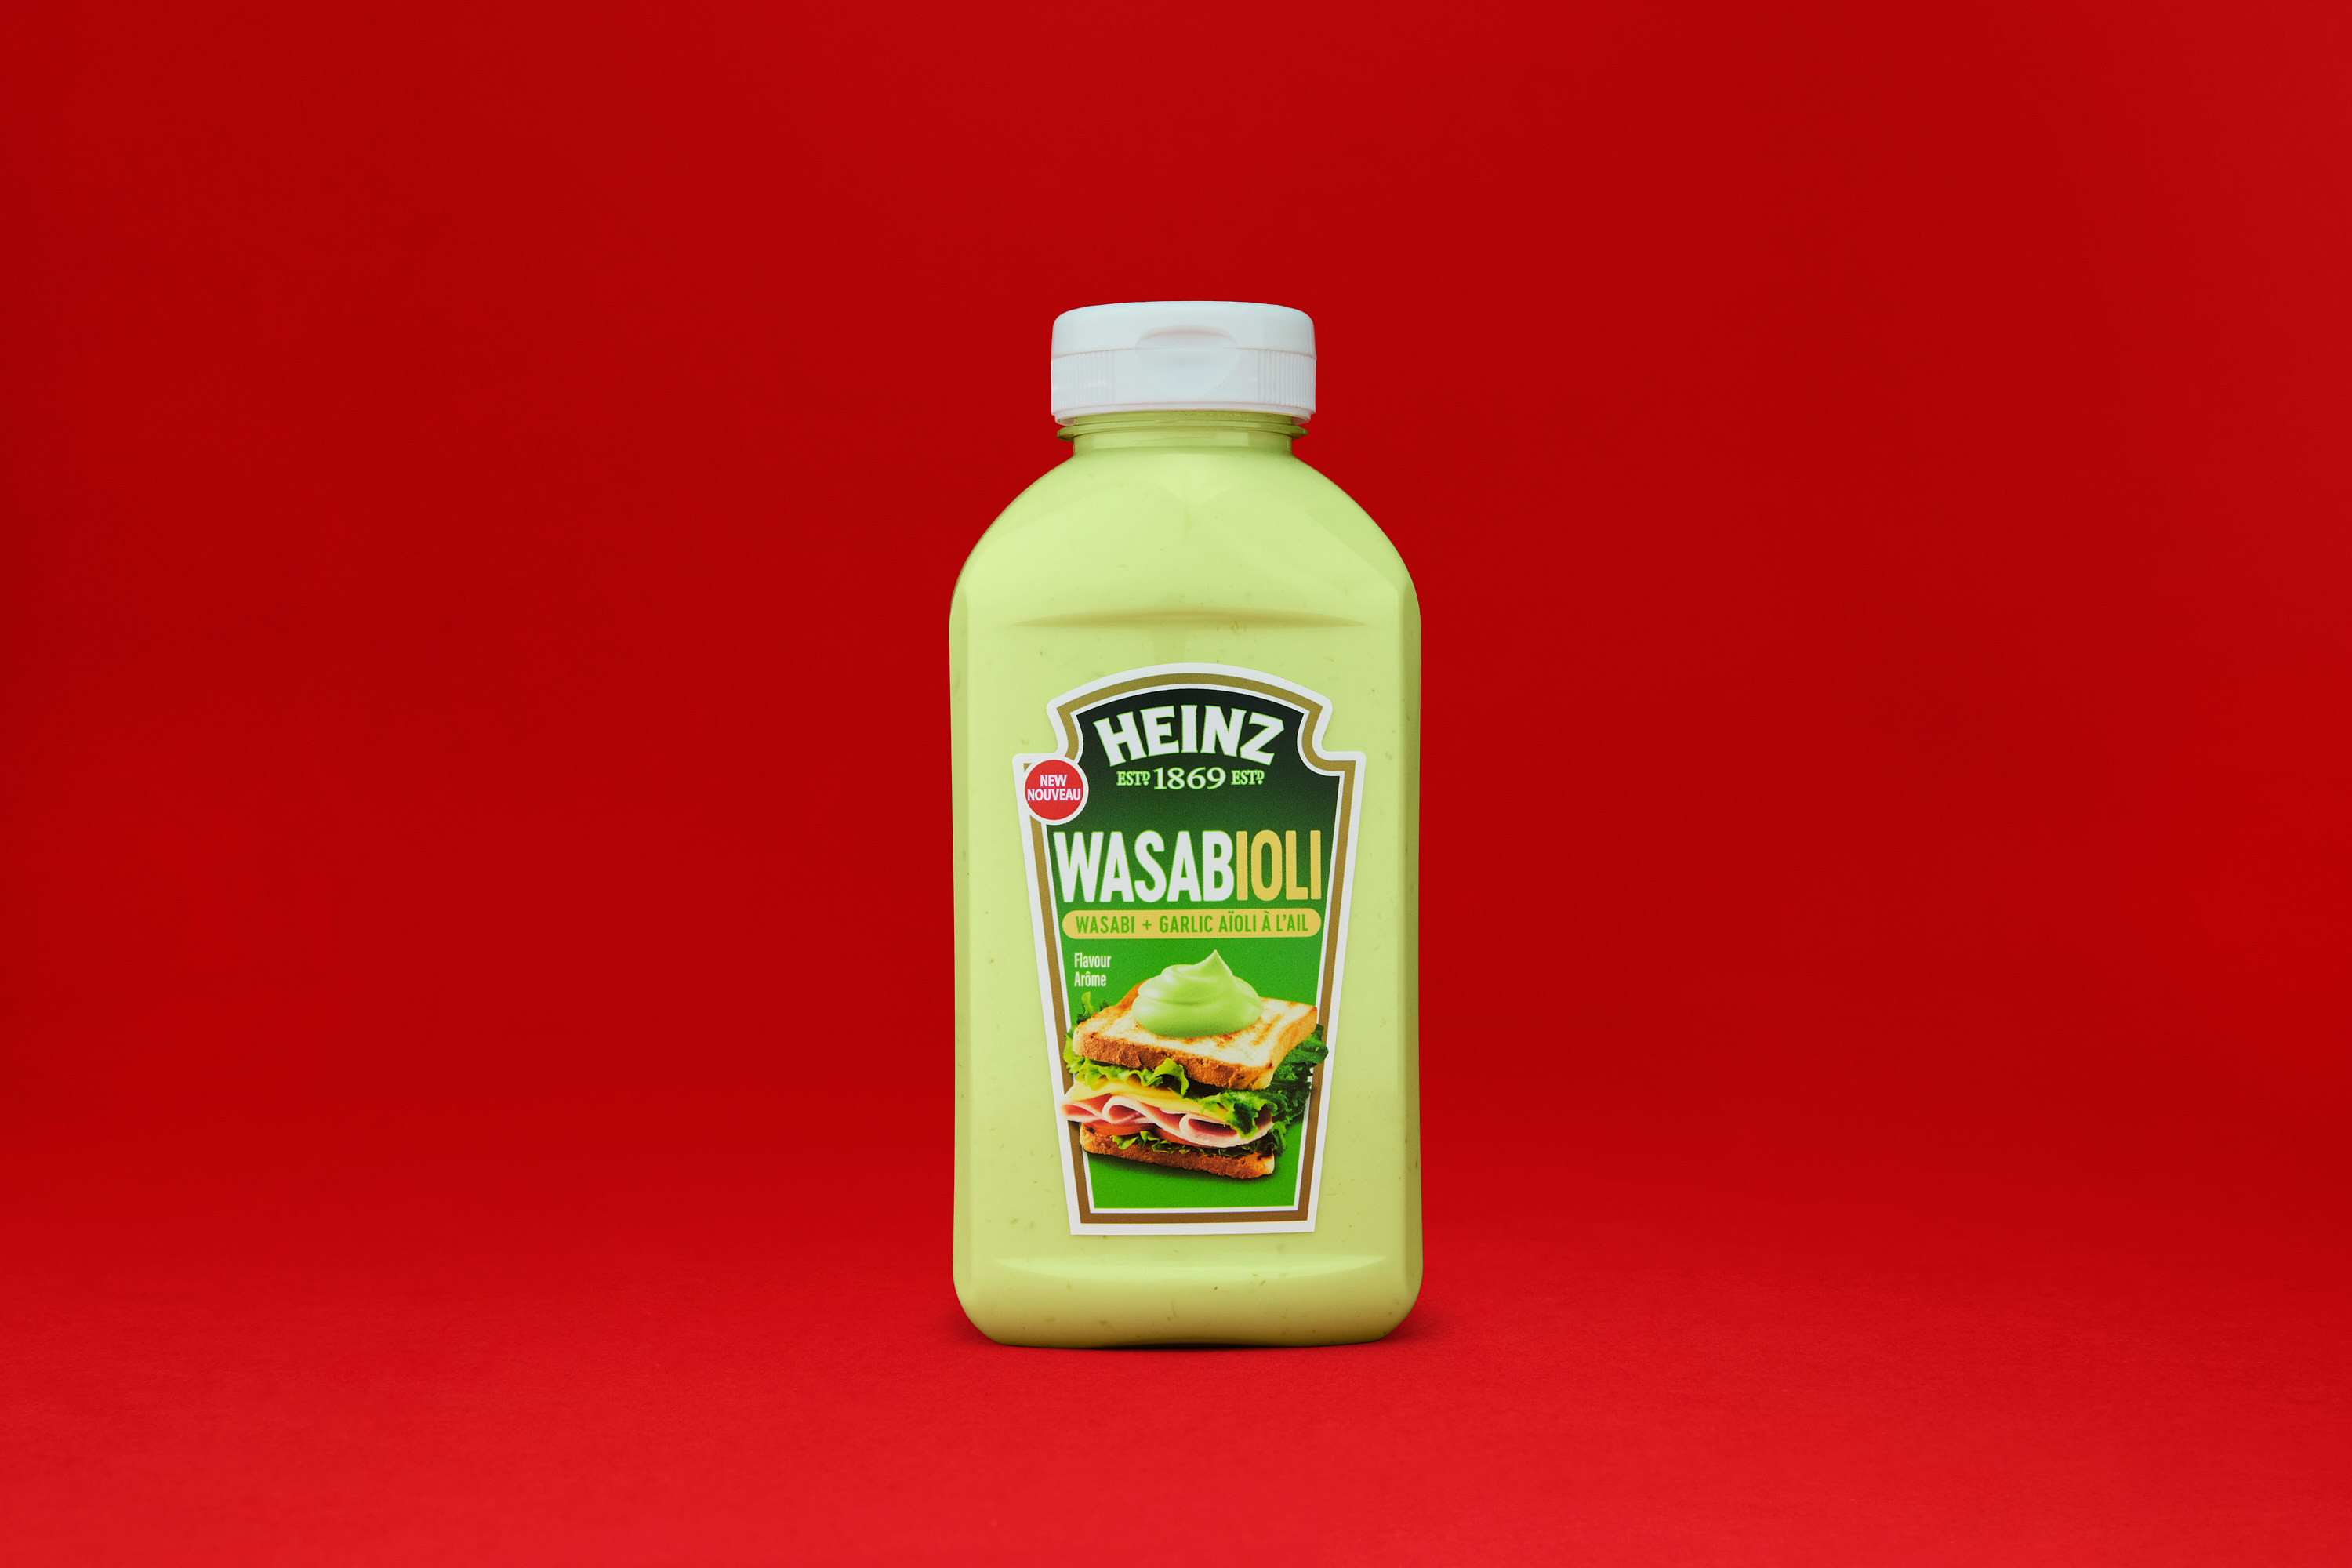 A bottle of Wasabioli sauce on a red backdrop.